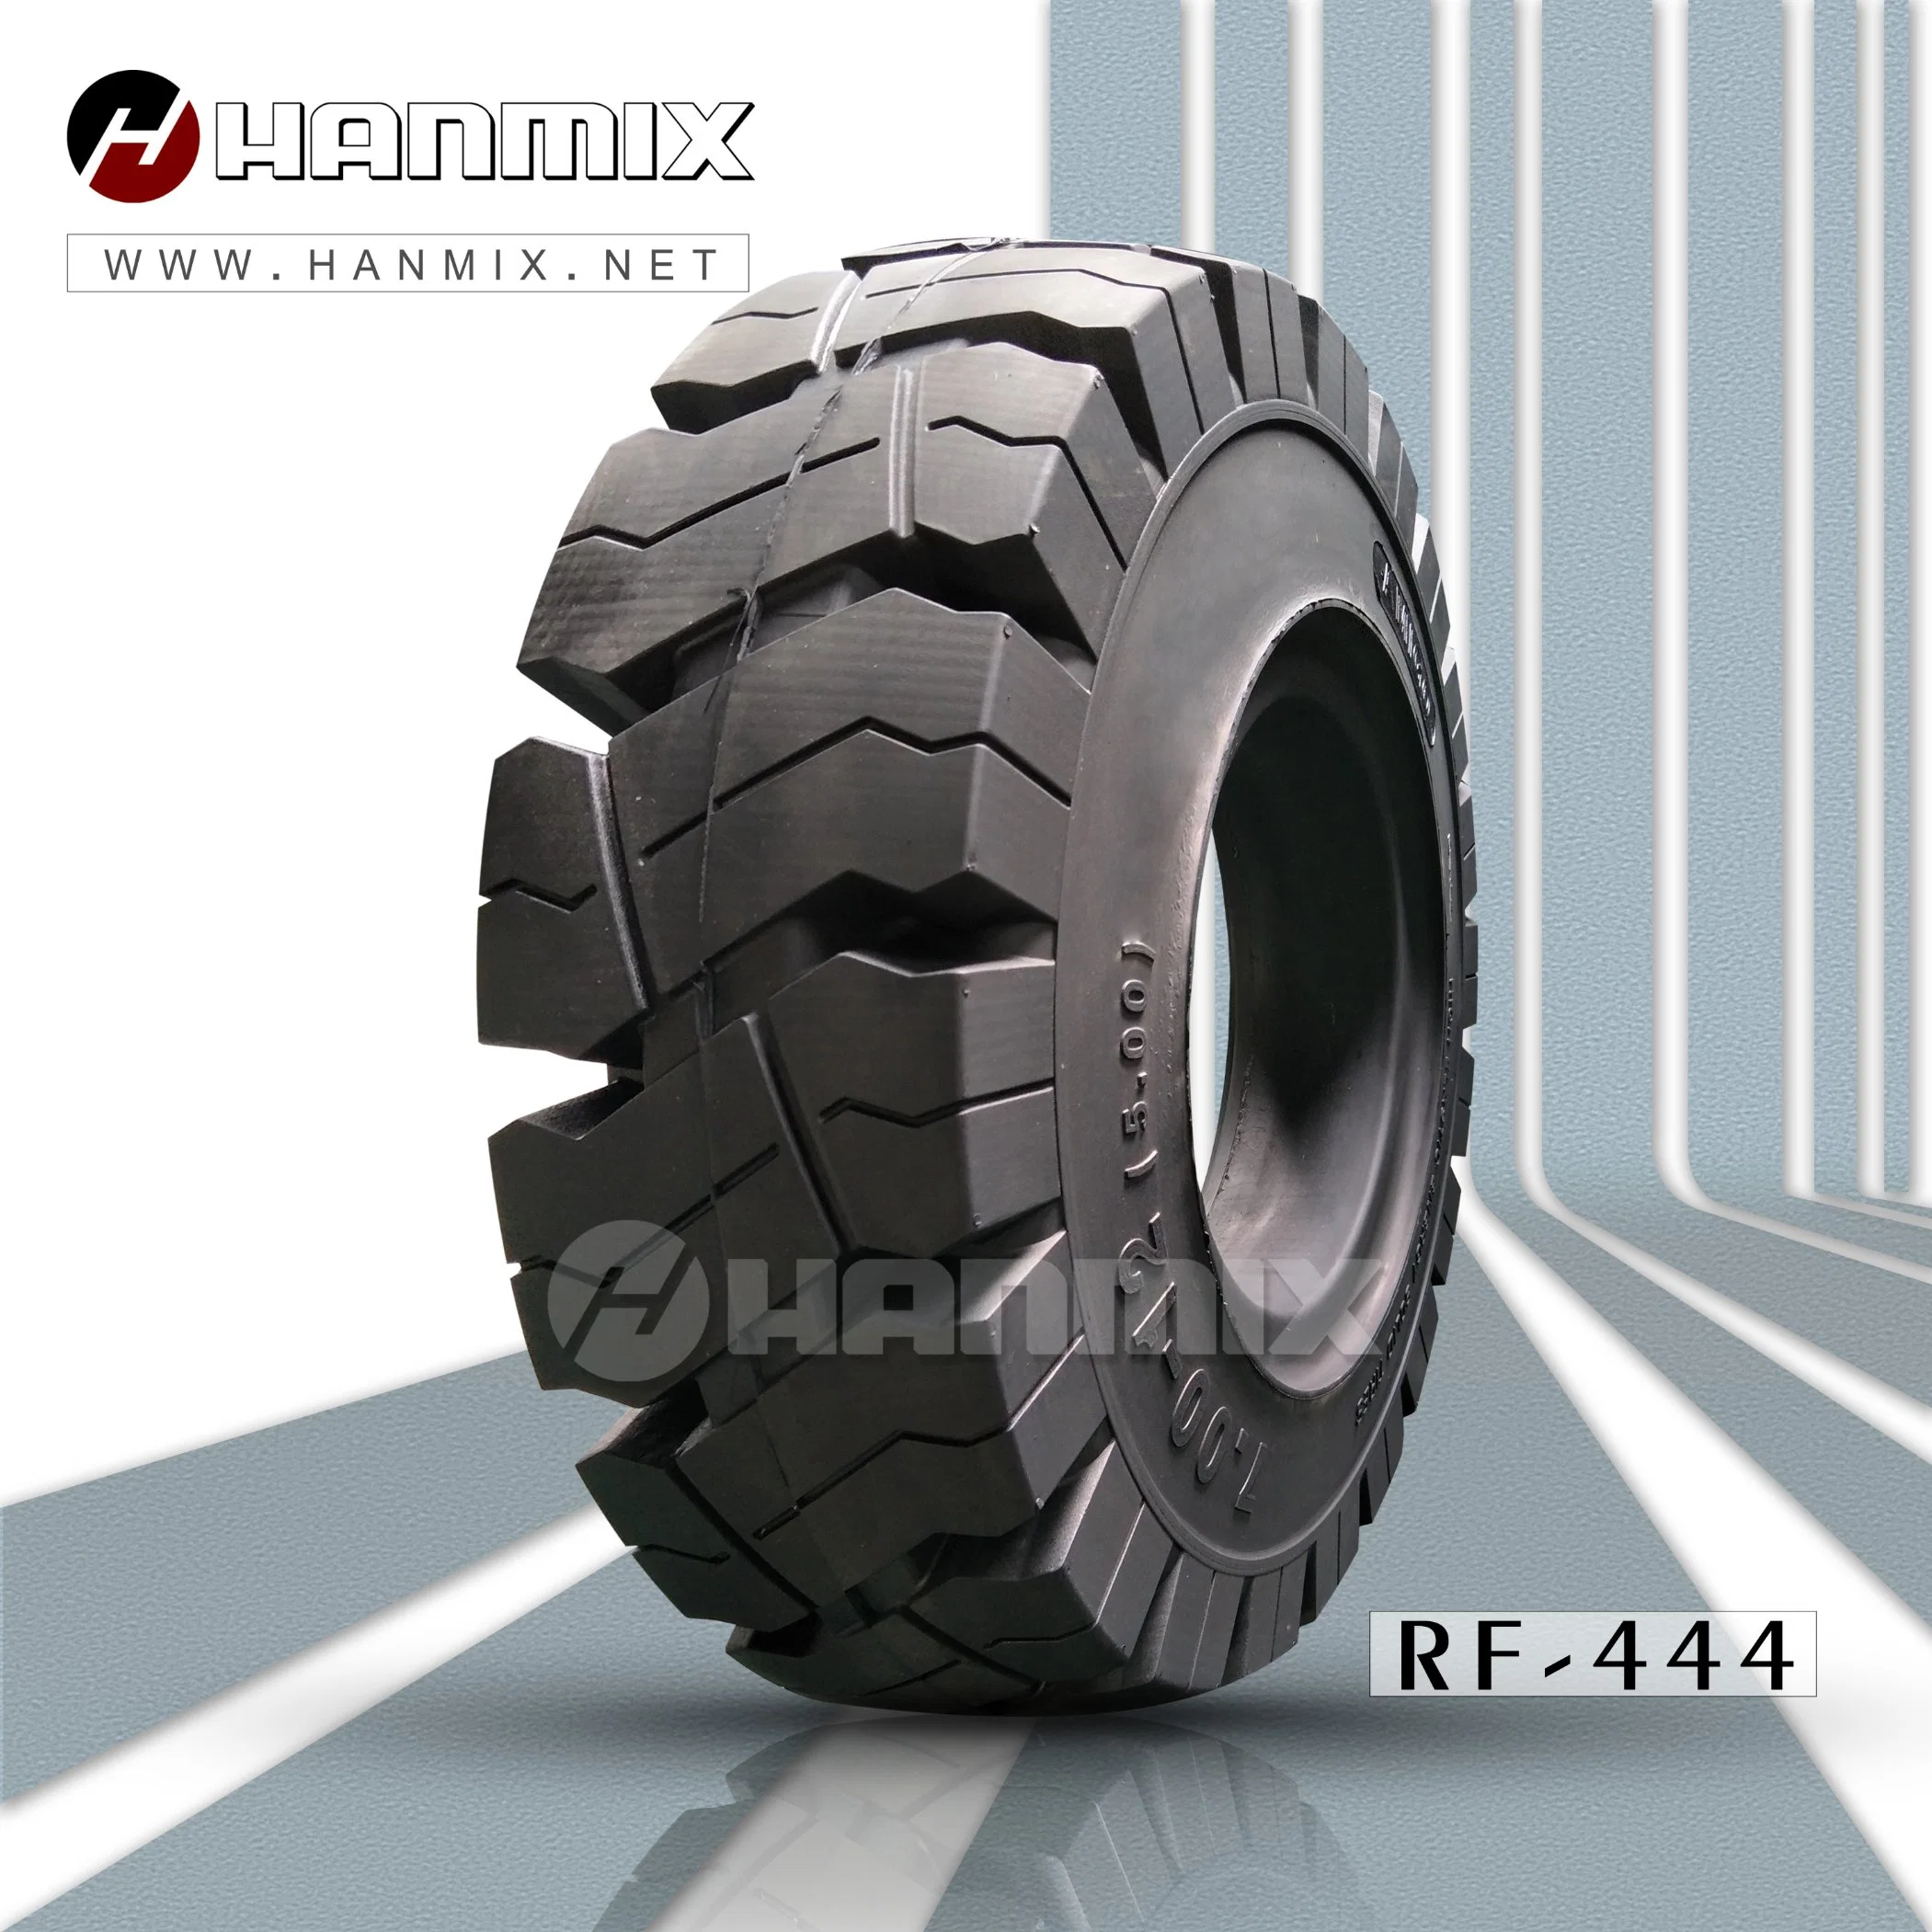 Hanmix Pneumatic Industrial Press-on Non-Marking Solid Forklift Tyres 16X6-8 18X7-8 200X50-10 21X8-9 23X9-10